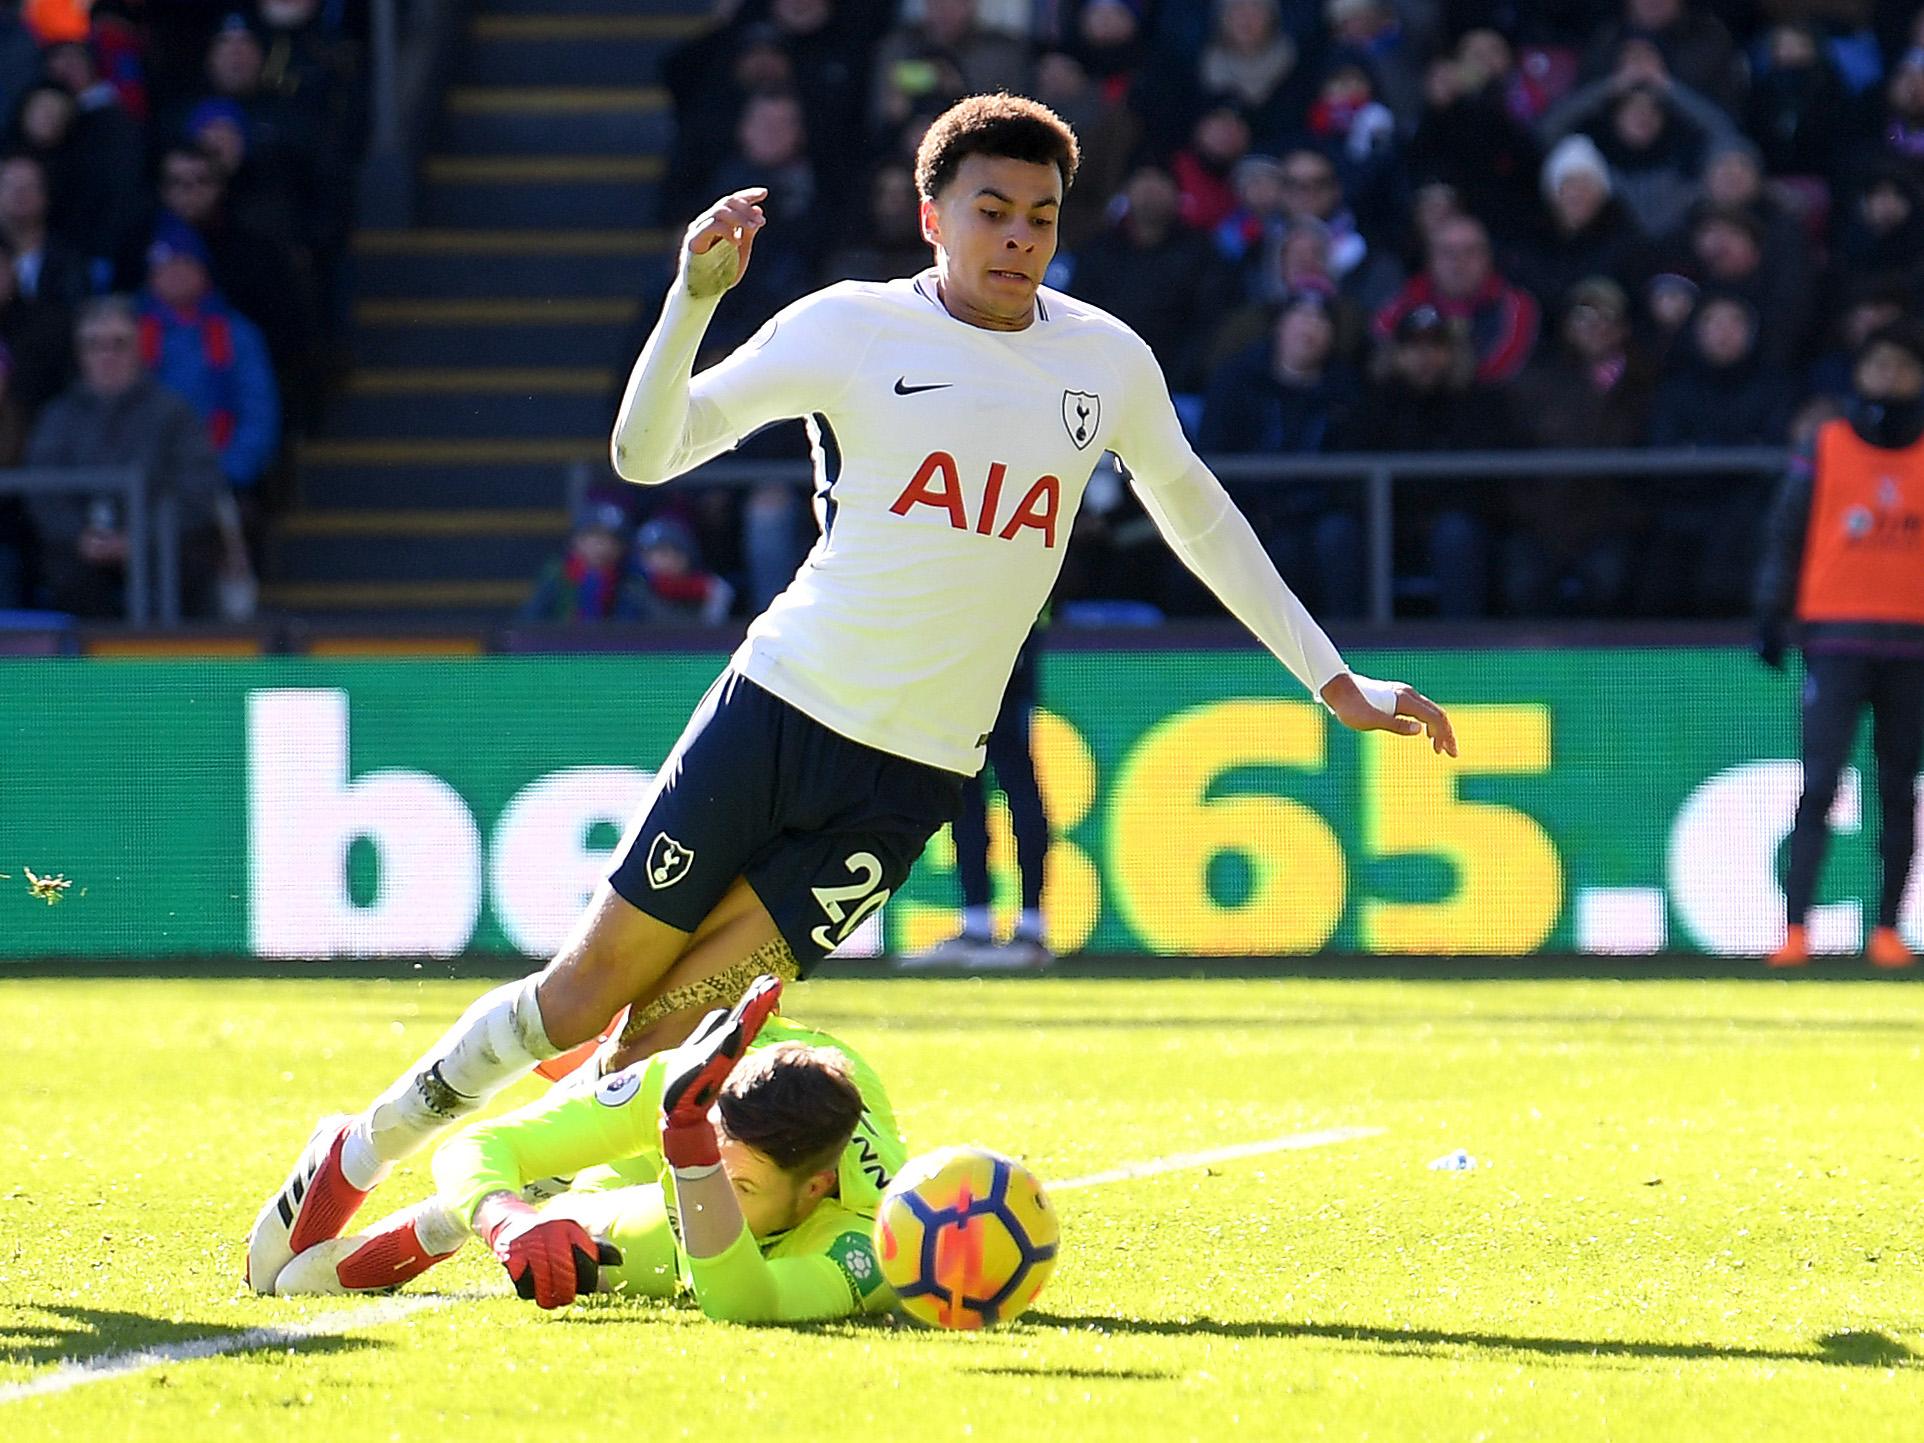 Dele Alli was accused of diving during Tottenham's win over Crystal Palace